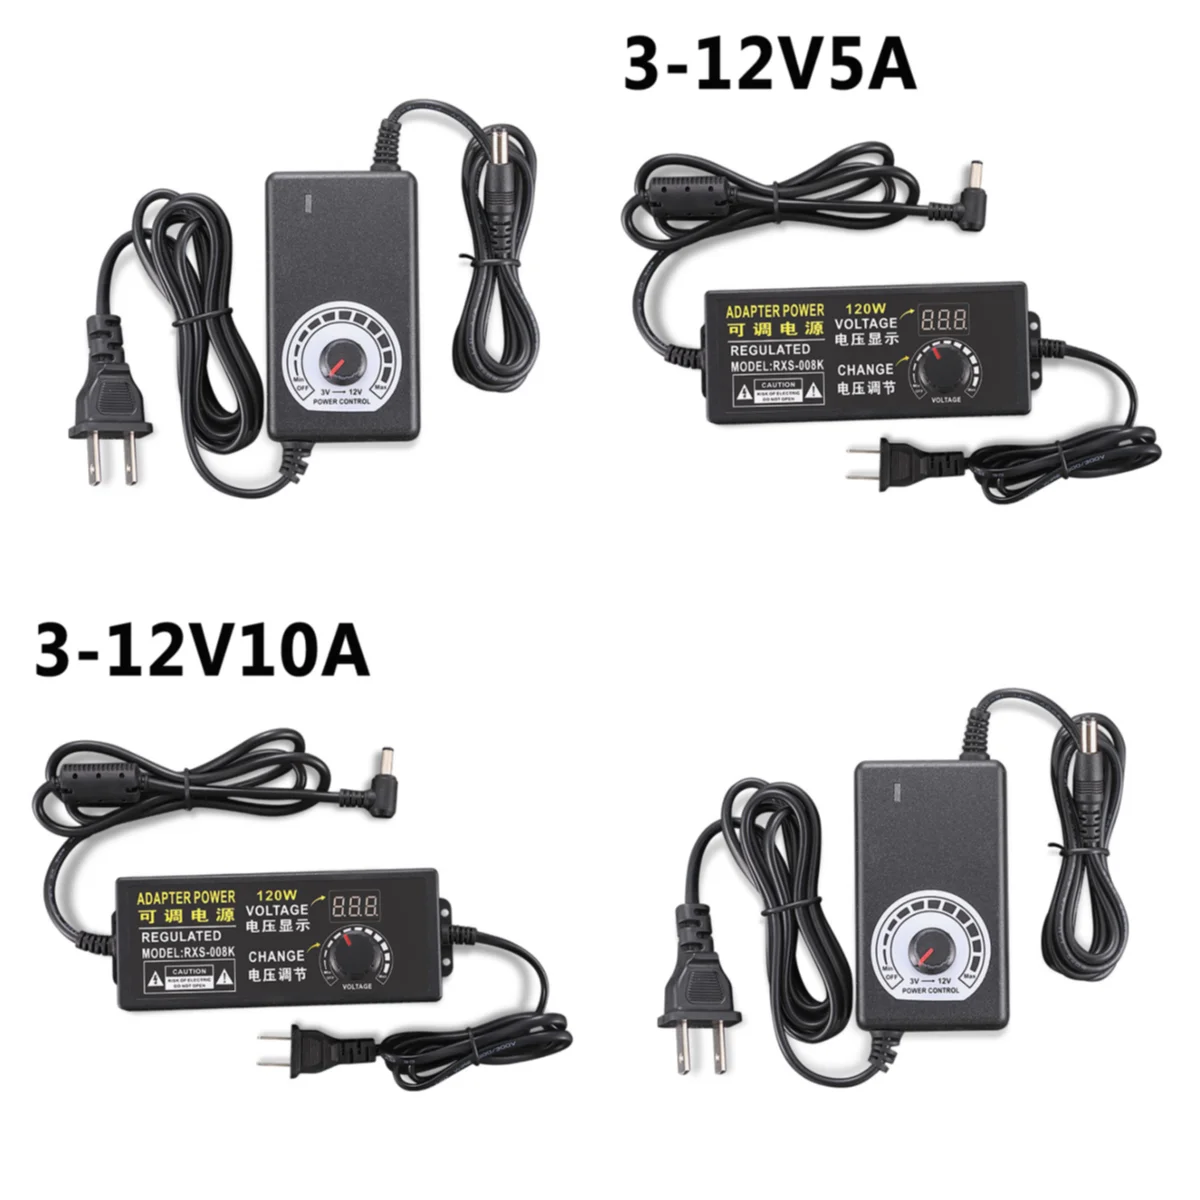 DC 3-12V 5A Speed Control Volt AC/DC Adjustable Power Adapter Supply Display 